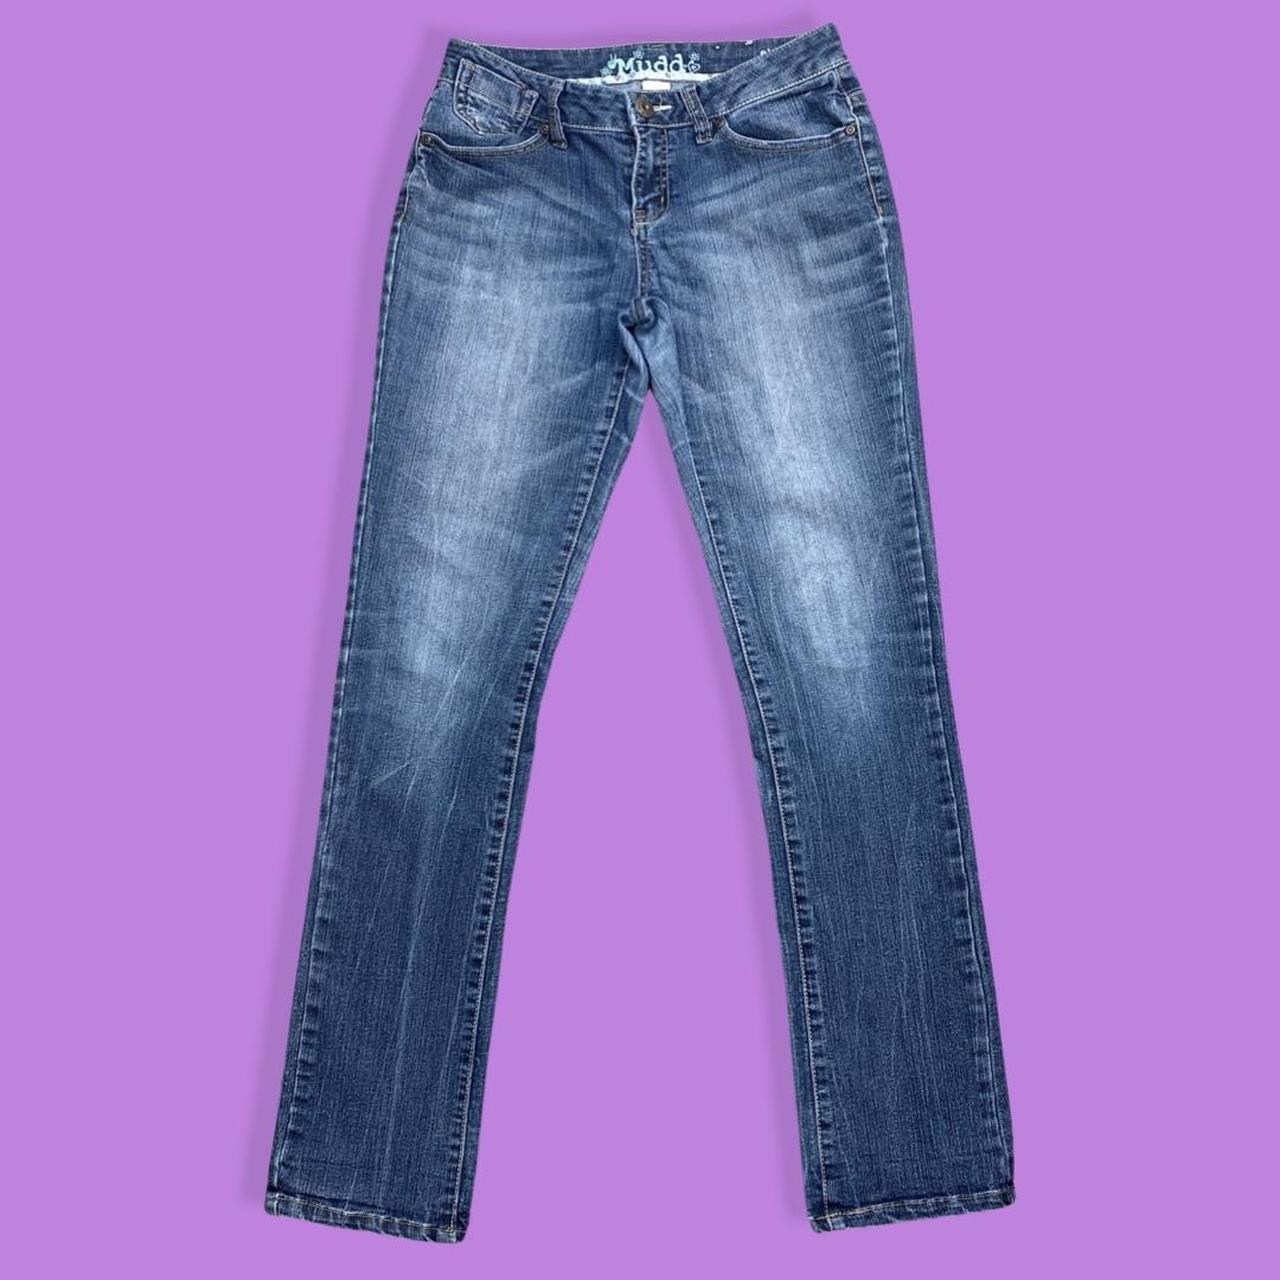 Product Image 1 - Mudd Y2k Vibes Skinny Jeans.